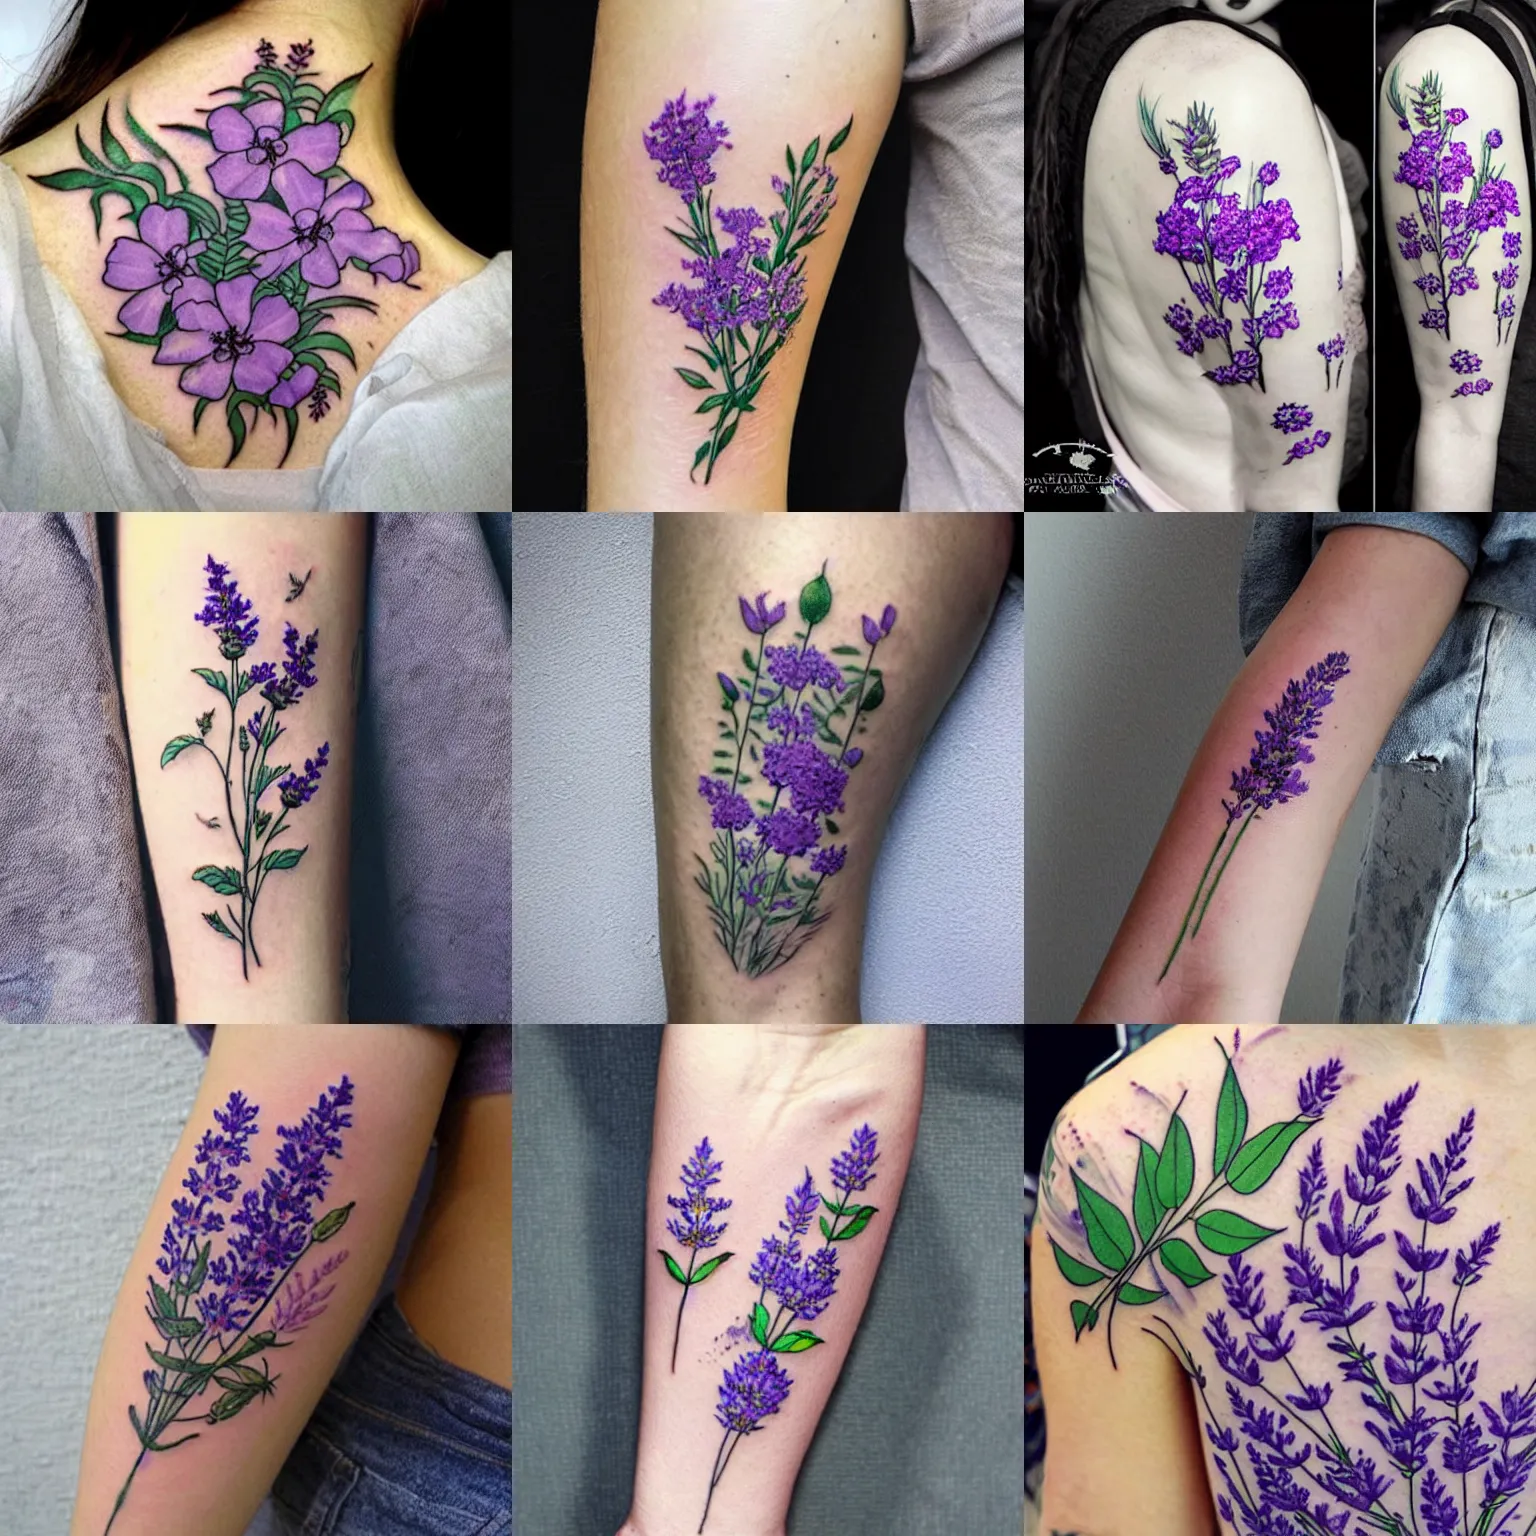 Tiny lavender tattoo on the left ankle - Tattoogrid.net